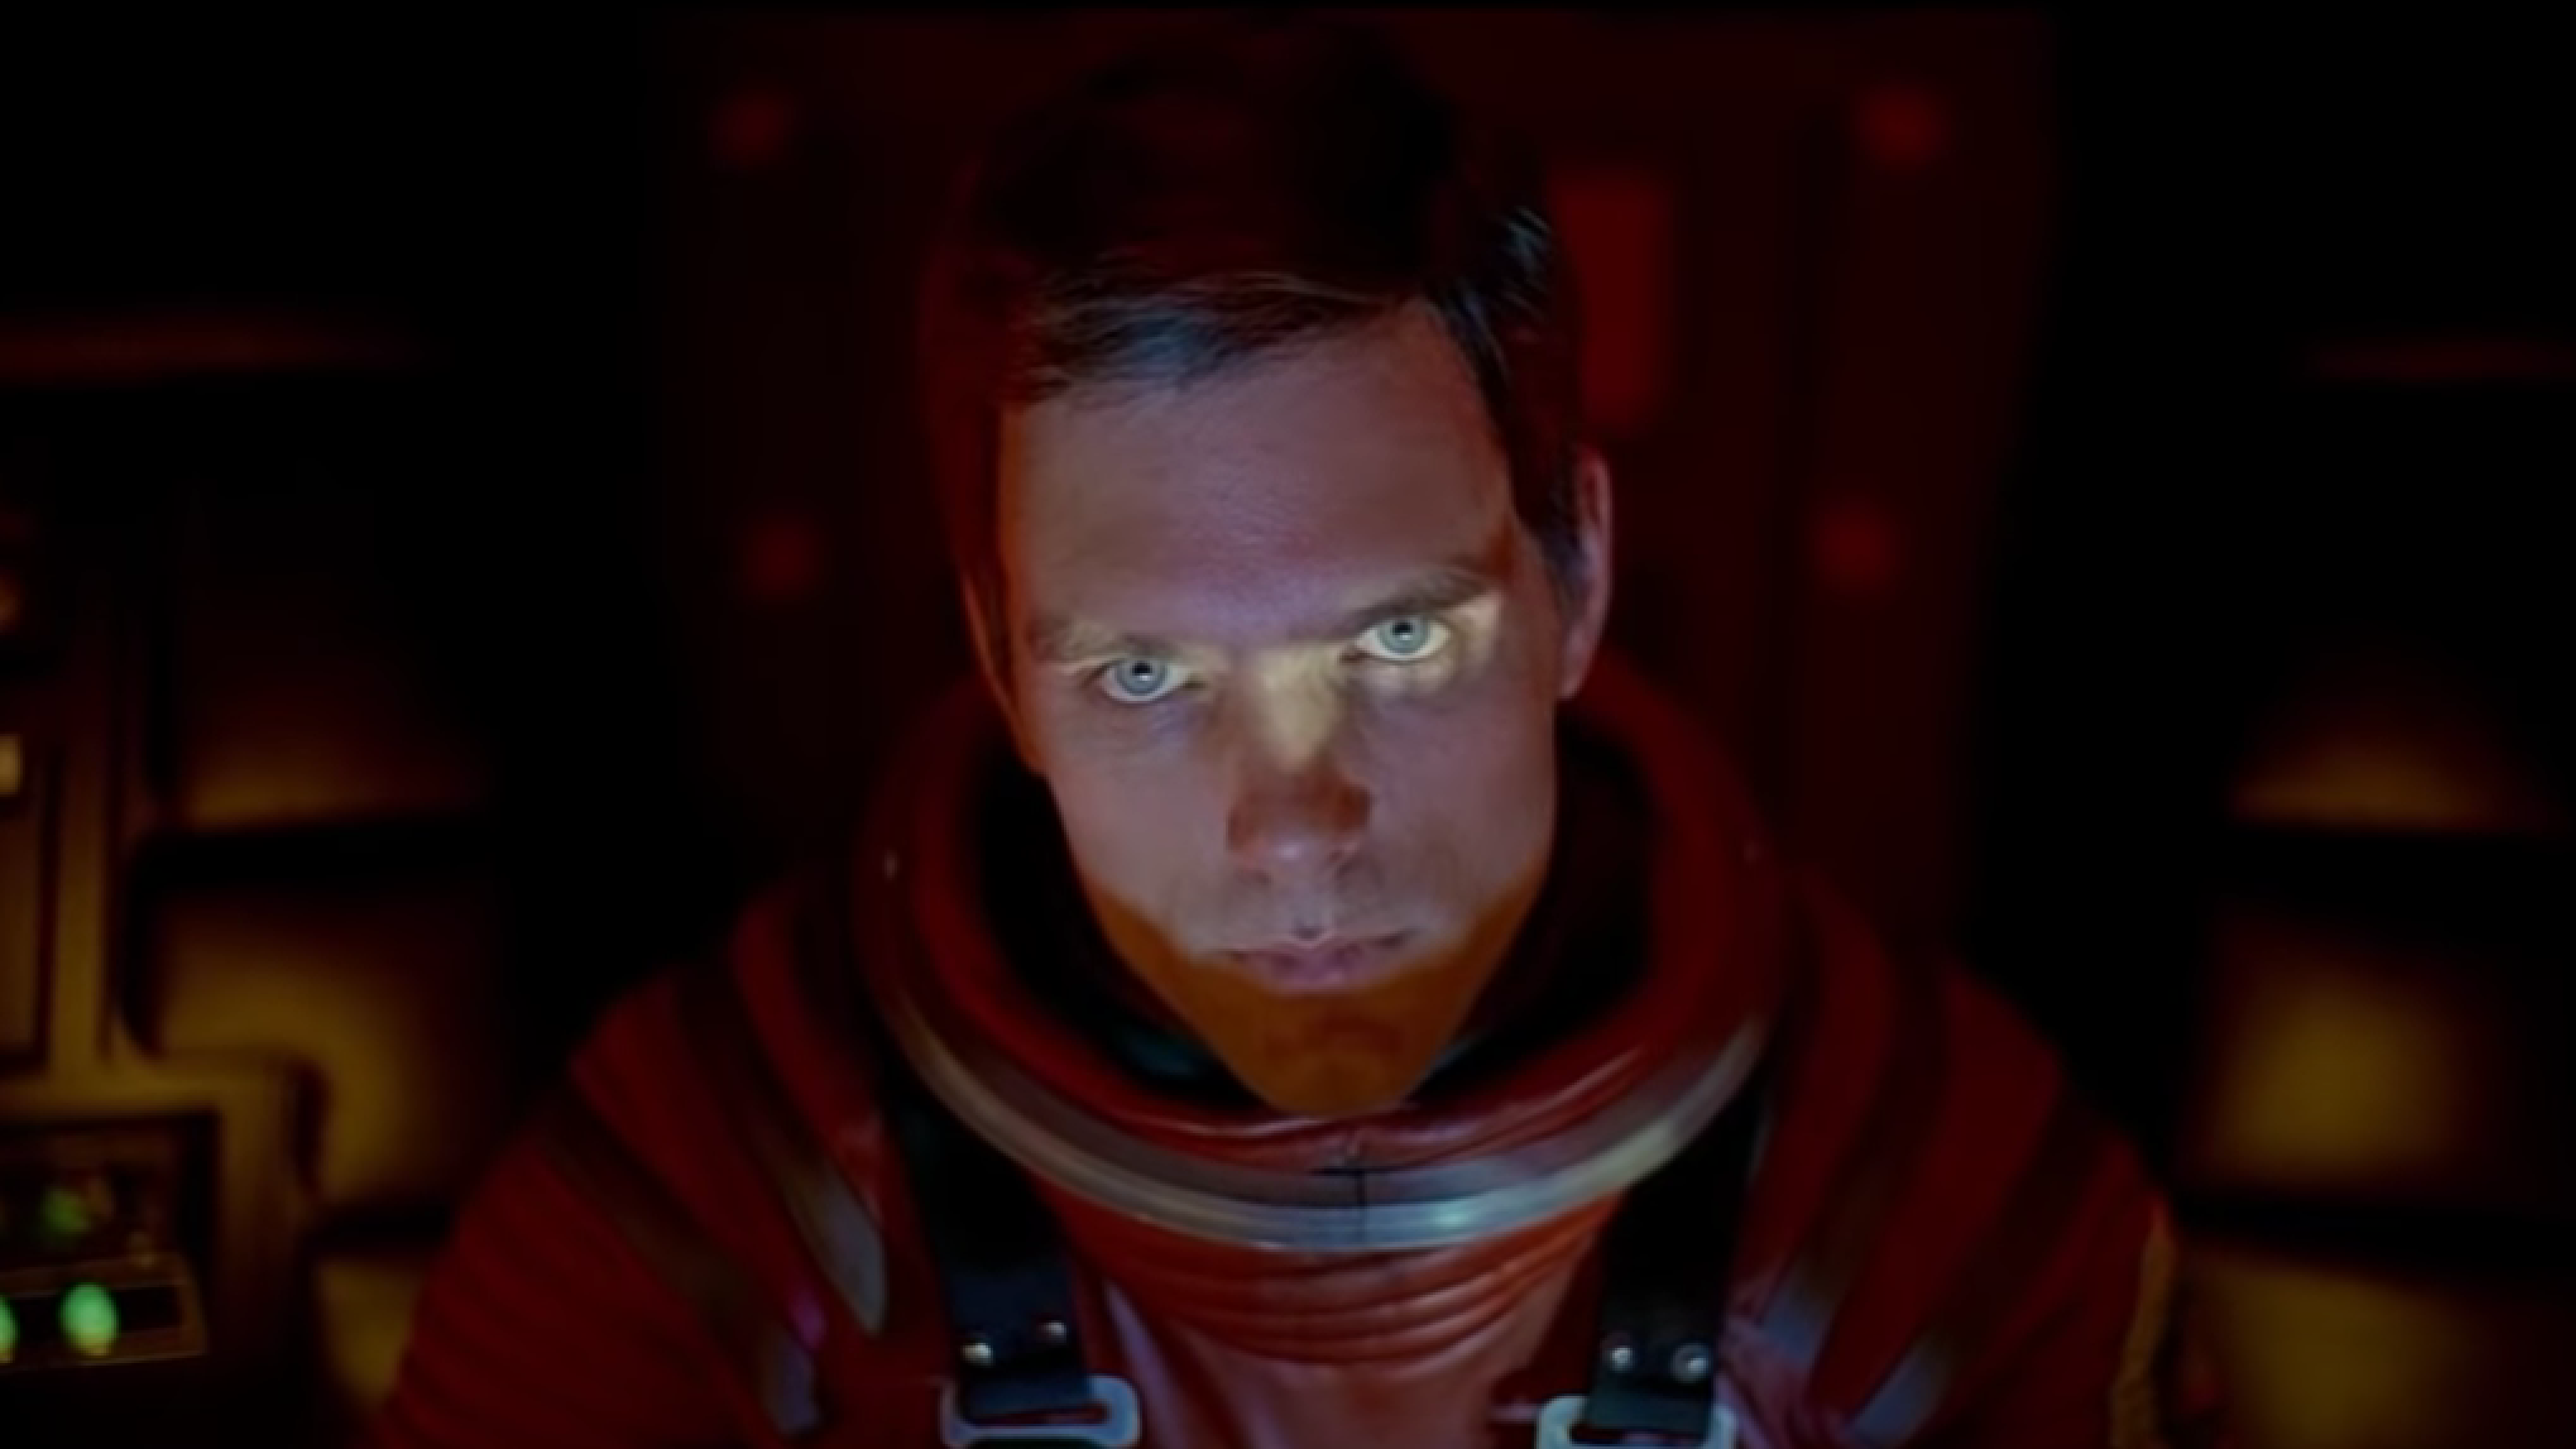 Still from the movie 2001: A Space Odyssey showing the character Dave Bowman asking the AI HAL 9000 to 'open the pod bay doors'.